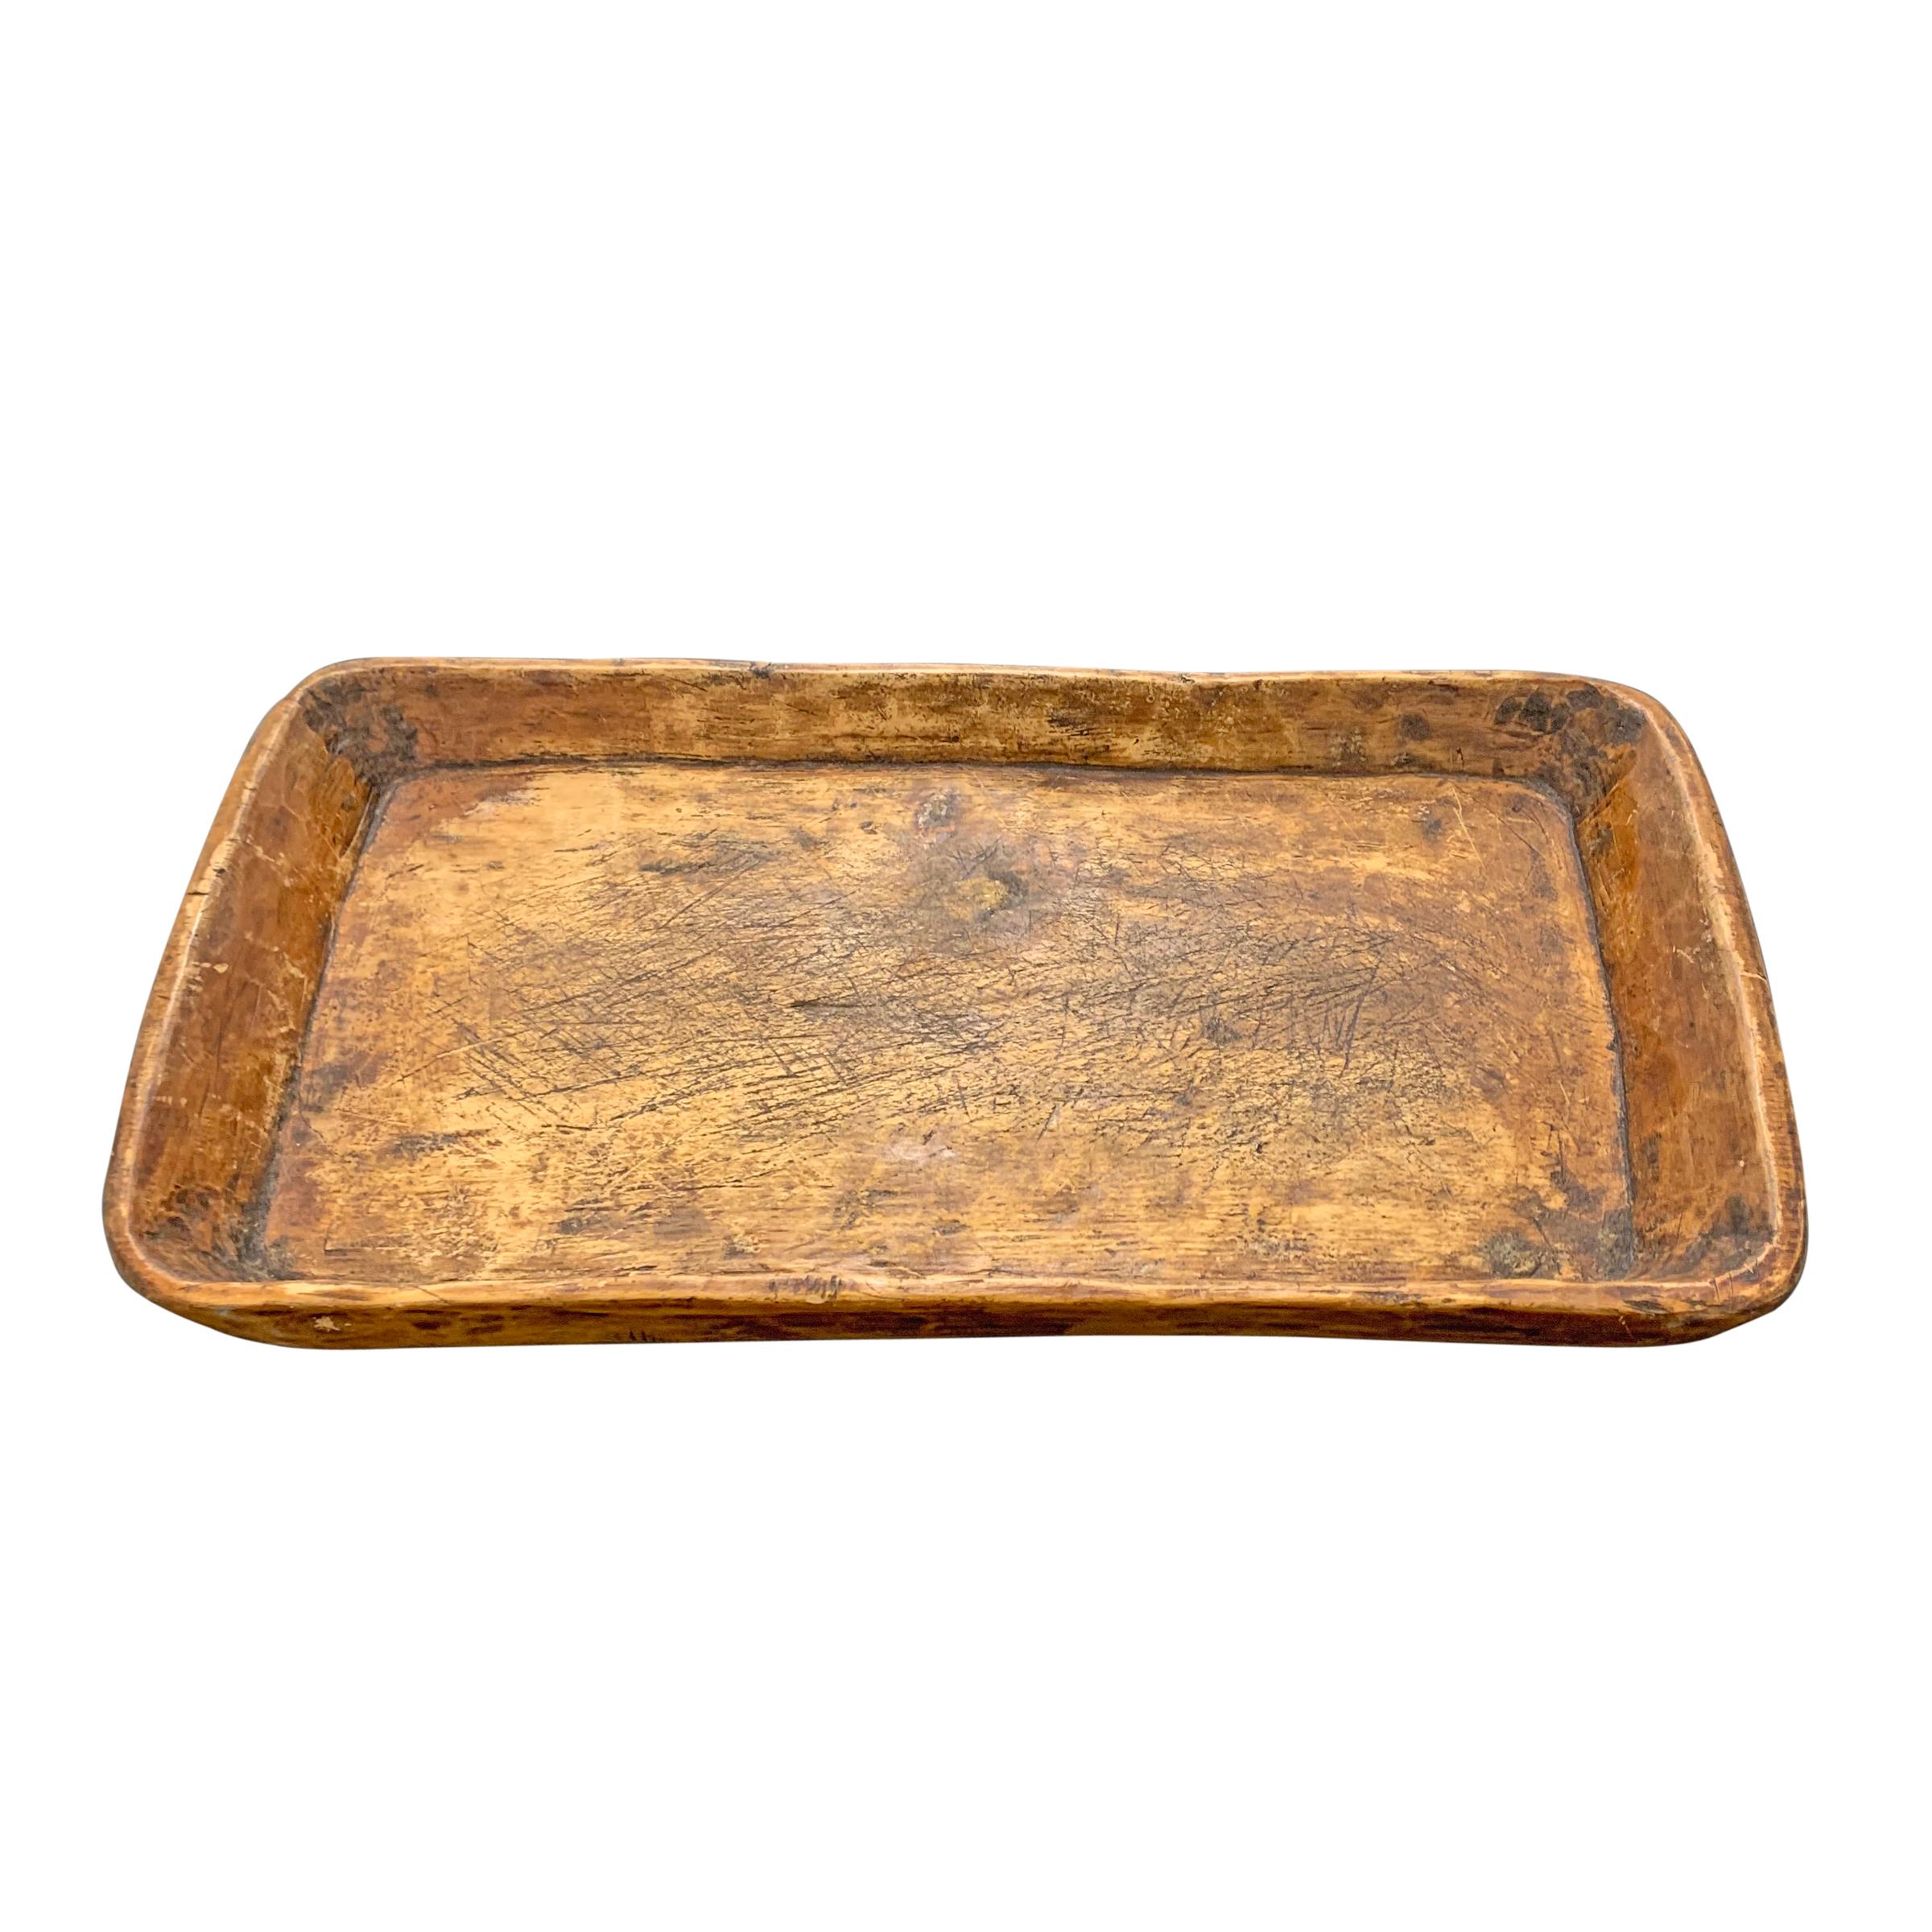 A wonderful 19th century tray hand carved of one piece of wood, with slightly tapered walls, myriad knife marks, and a wonderful patina only time can bestow. Perfect for serving foods at your next party, or collecting the day's mail on a table in